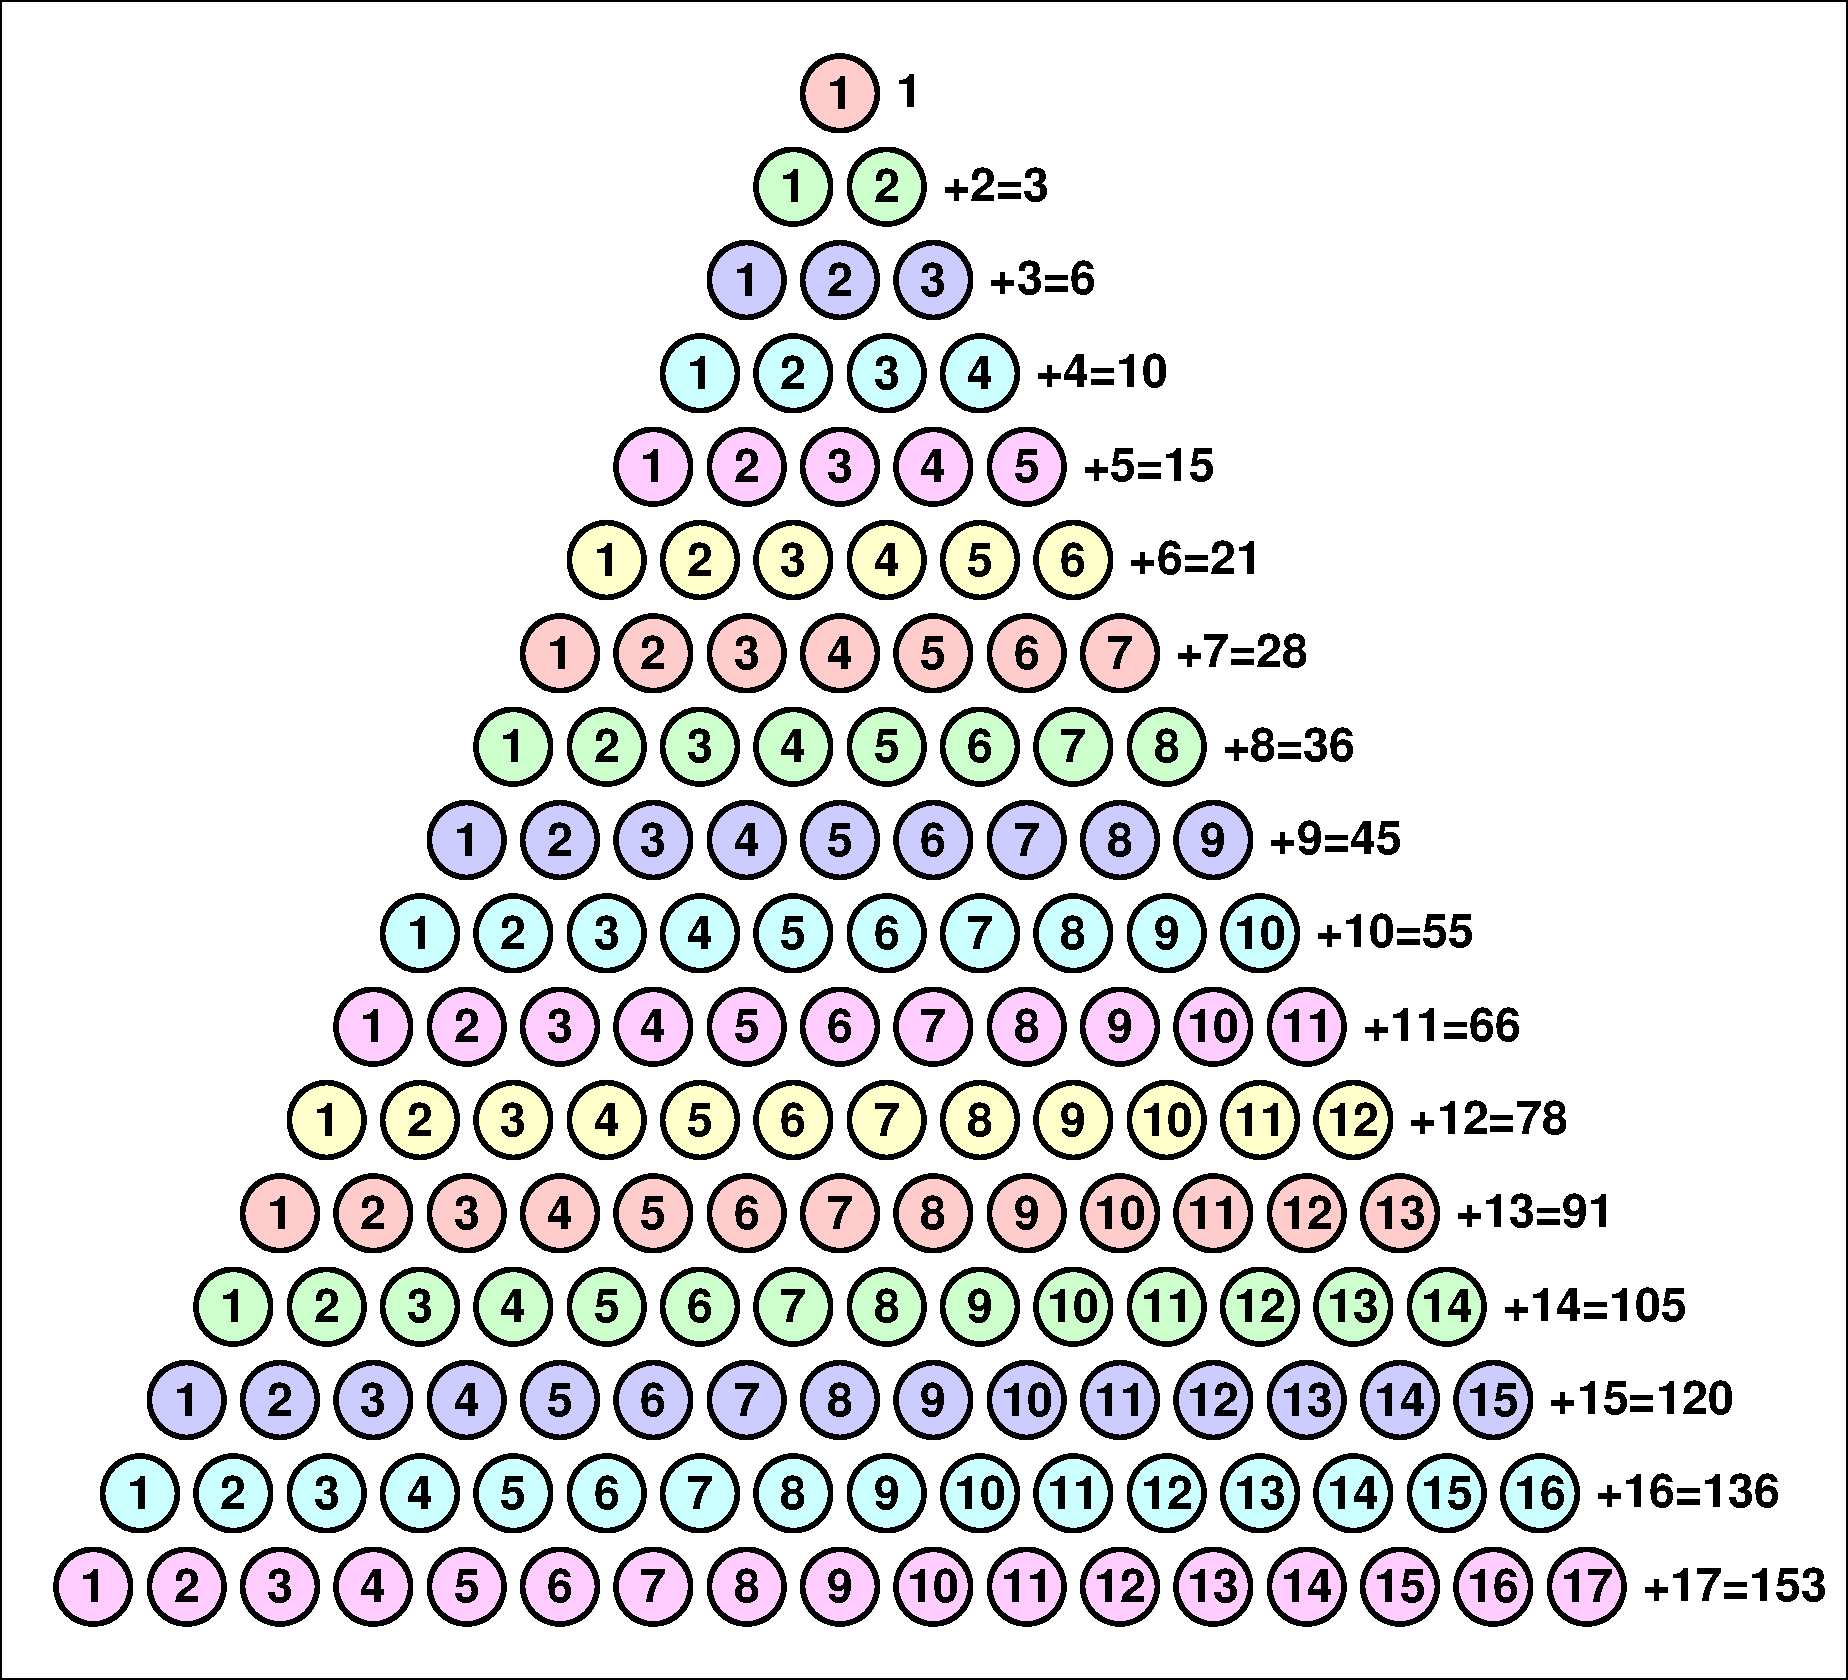 Number of the fish using dots